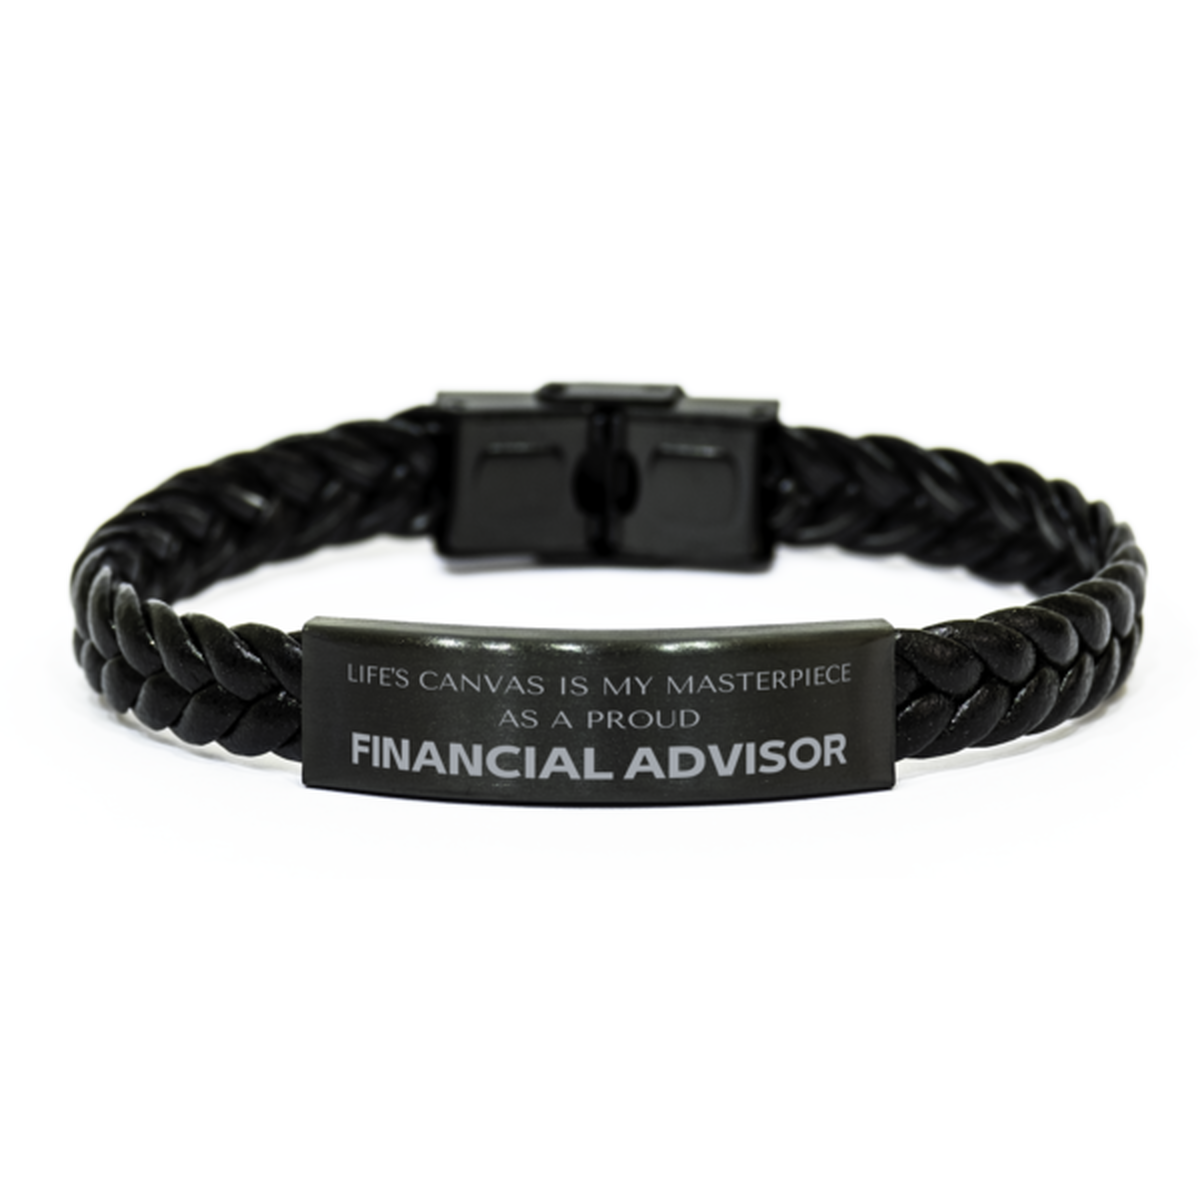 Proud Financial Advisor Gifts, Life's canvas is my masterpiece, Epic Birthday Christmas Unique Braided Leather Bracelet For Financial Advisor, Coworkers, Men, Women, Friends